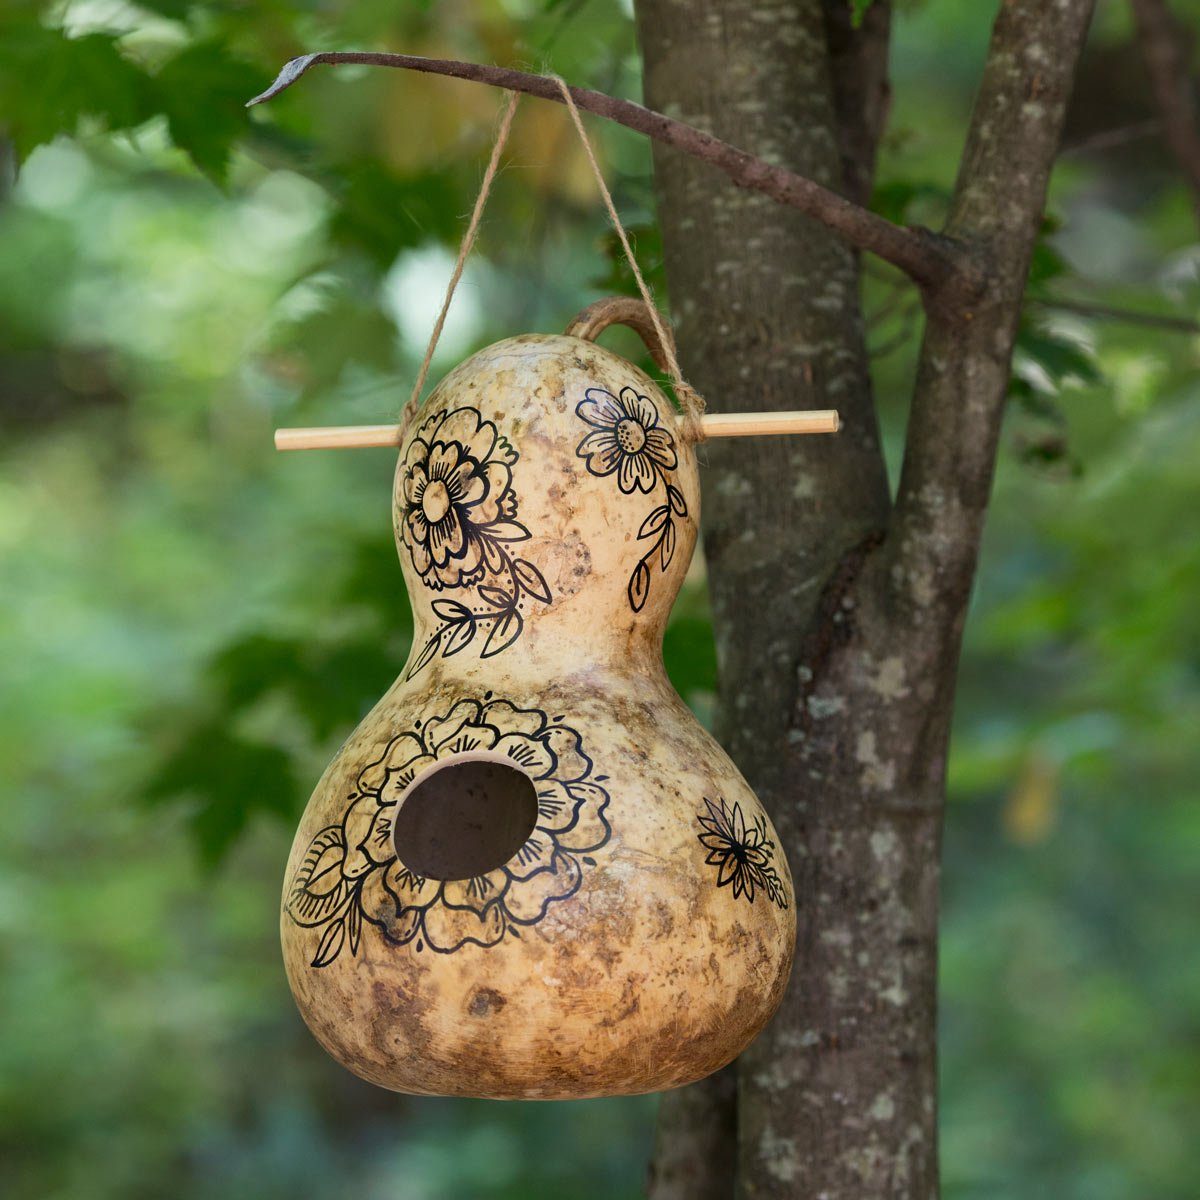 How to Make Gourd Birdhouses